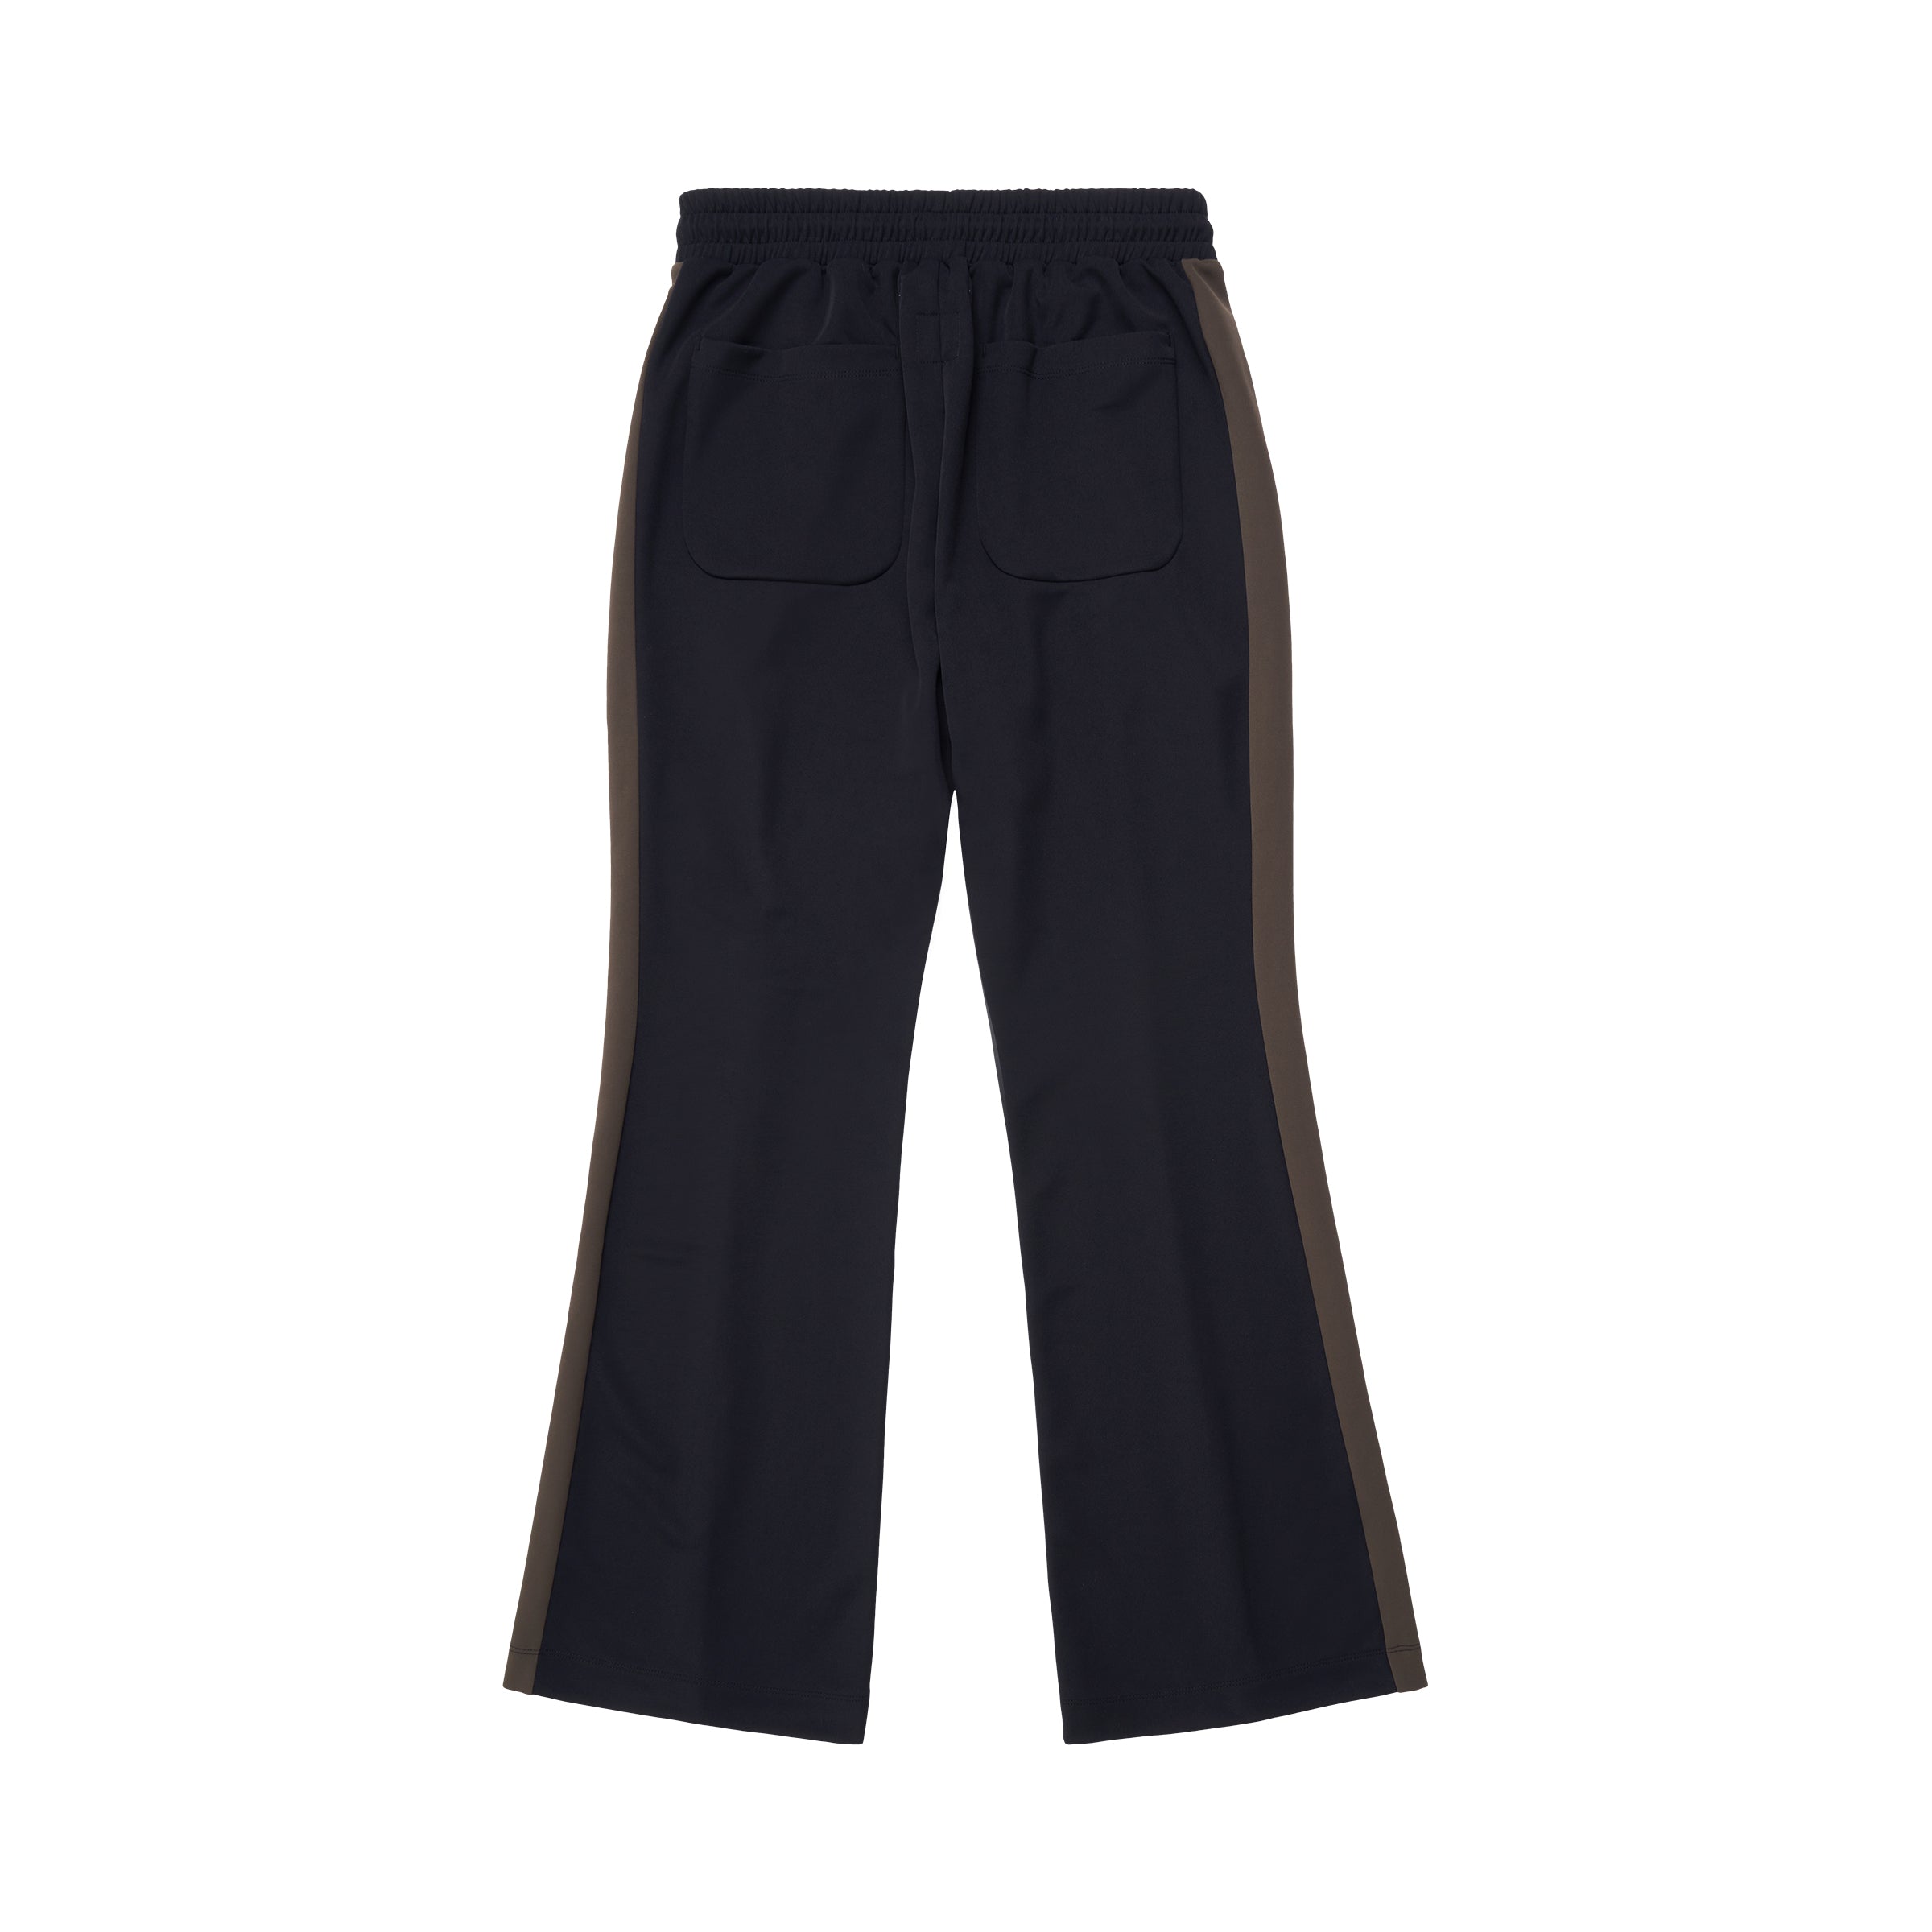 Flared Jersey Pants with Contrasting Colour Stripes in Black